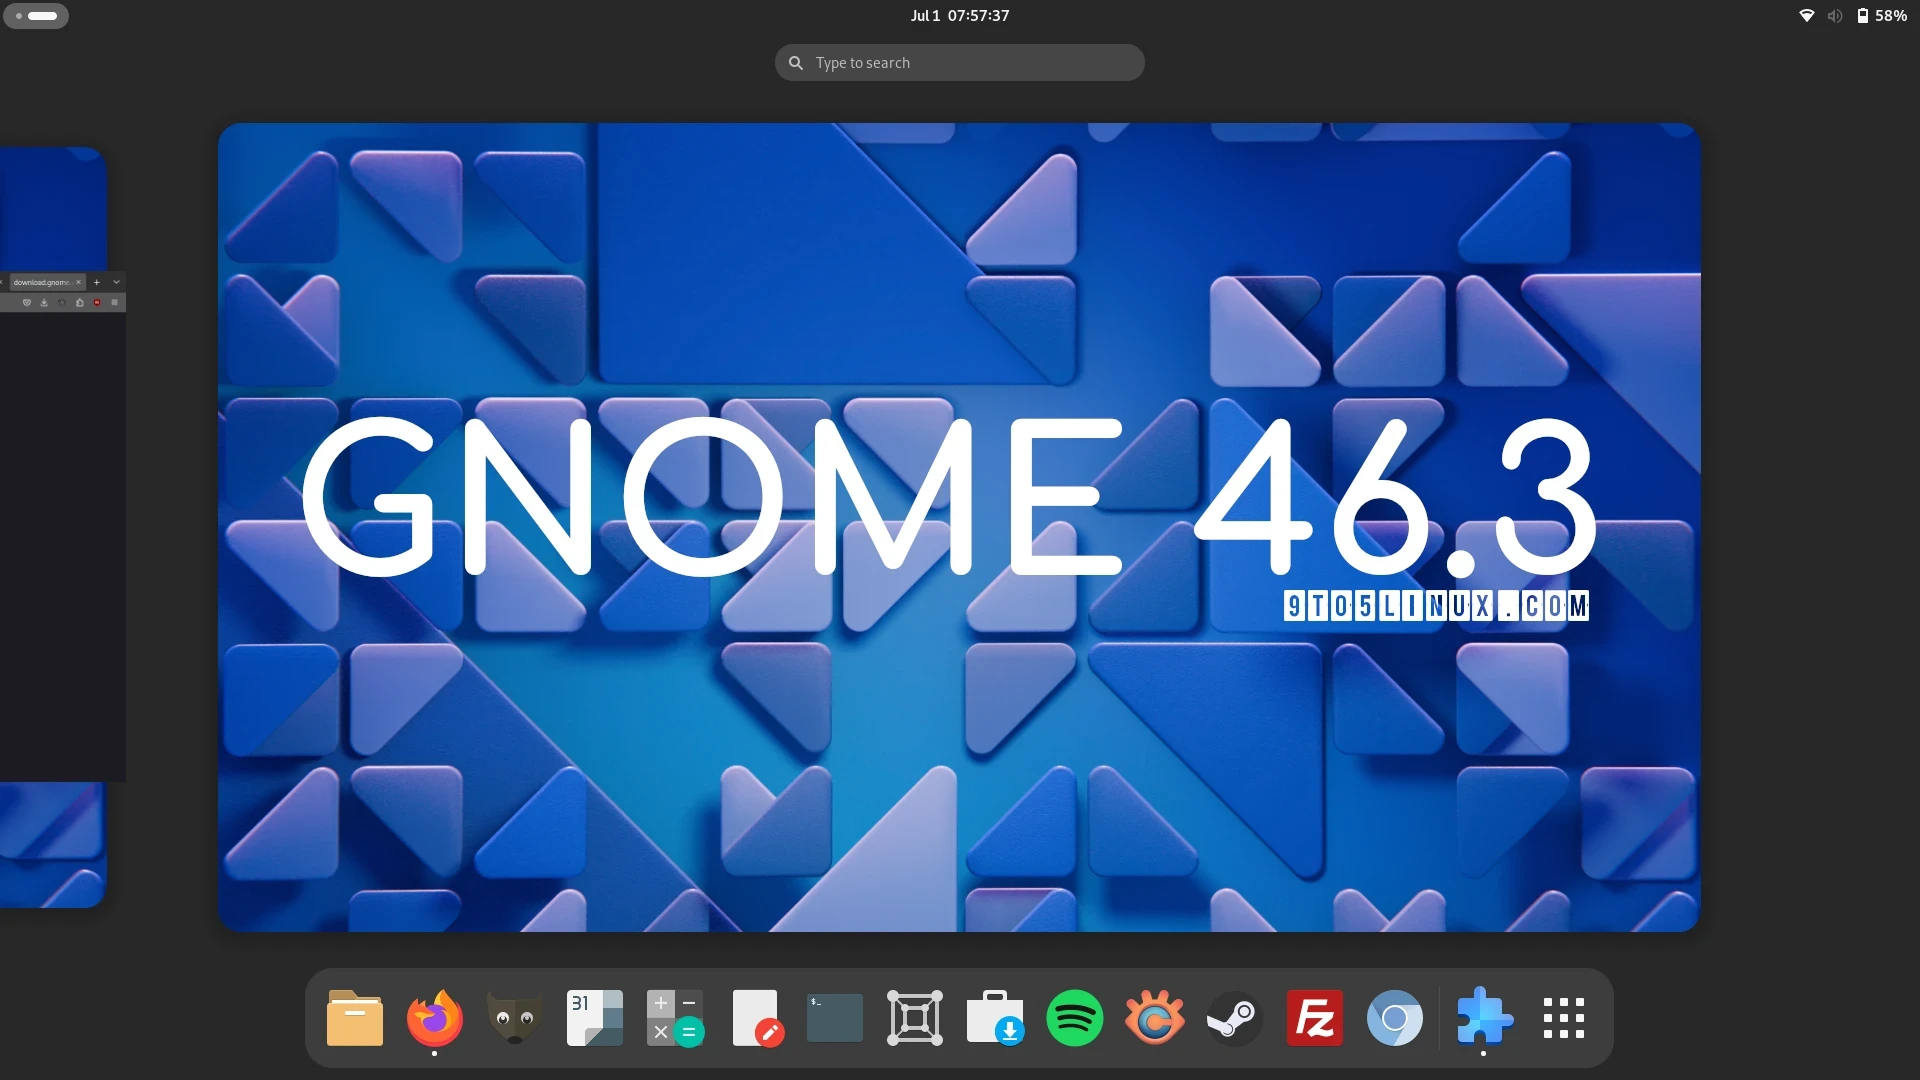 Screenshot of the GNOME desktop environment showing the Activities Overview.